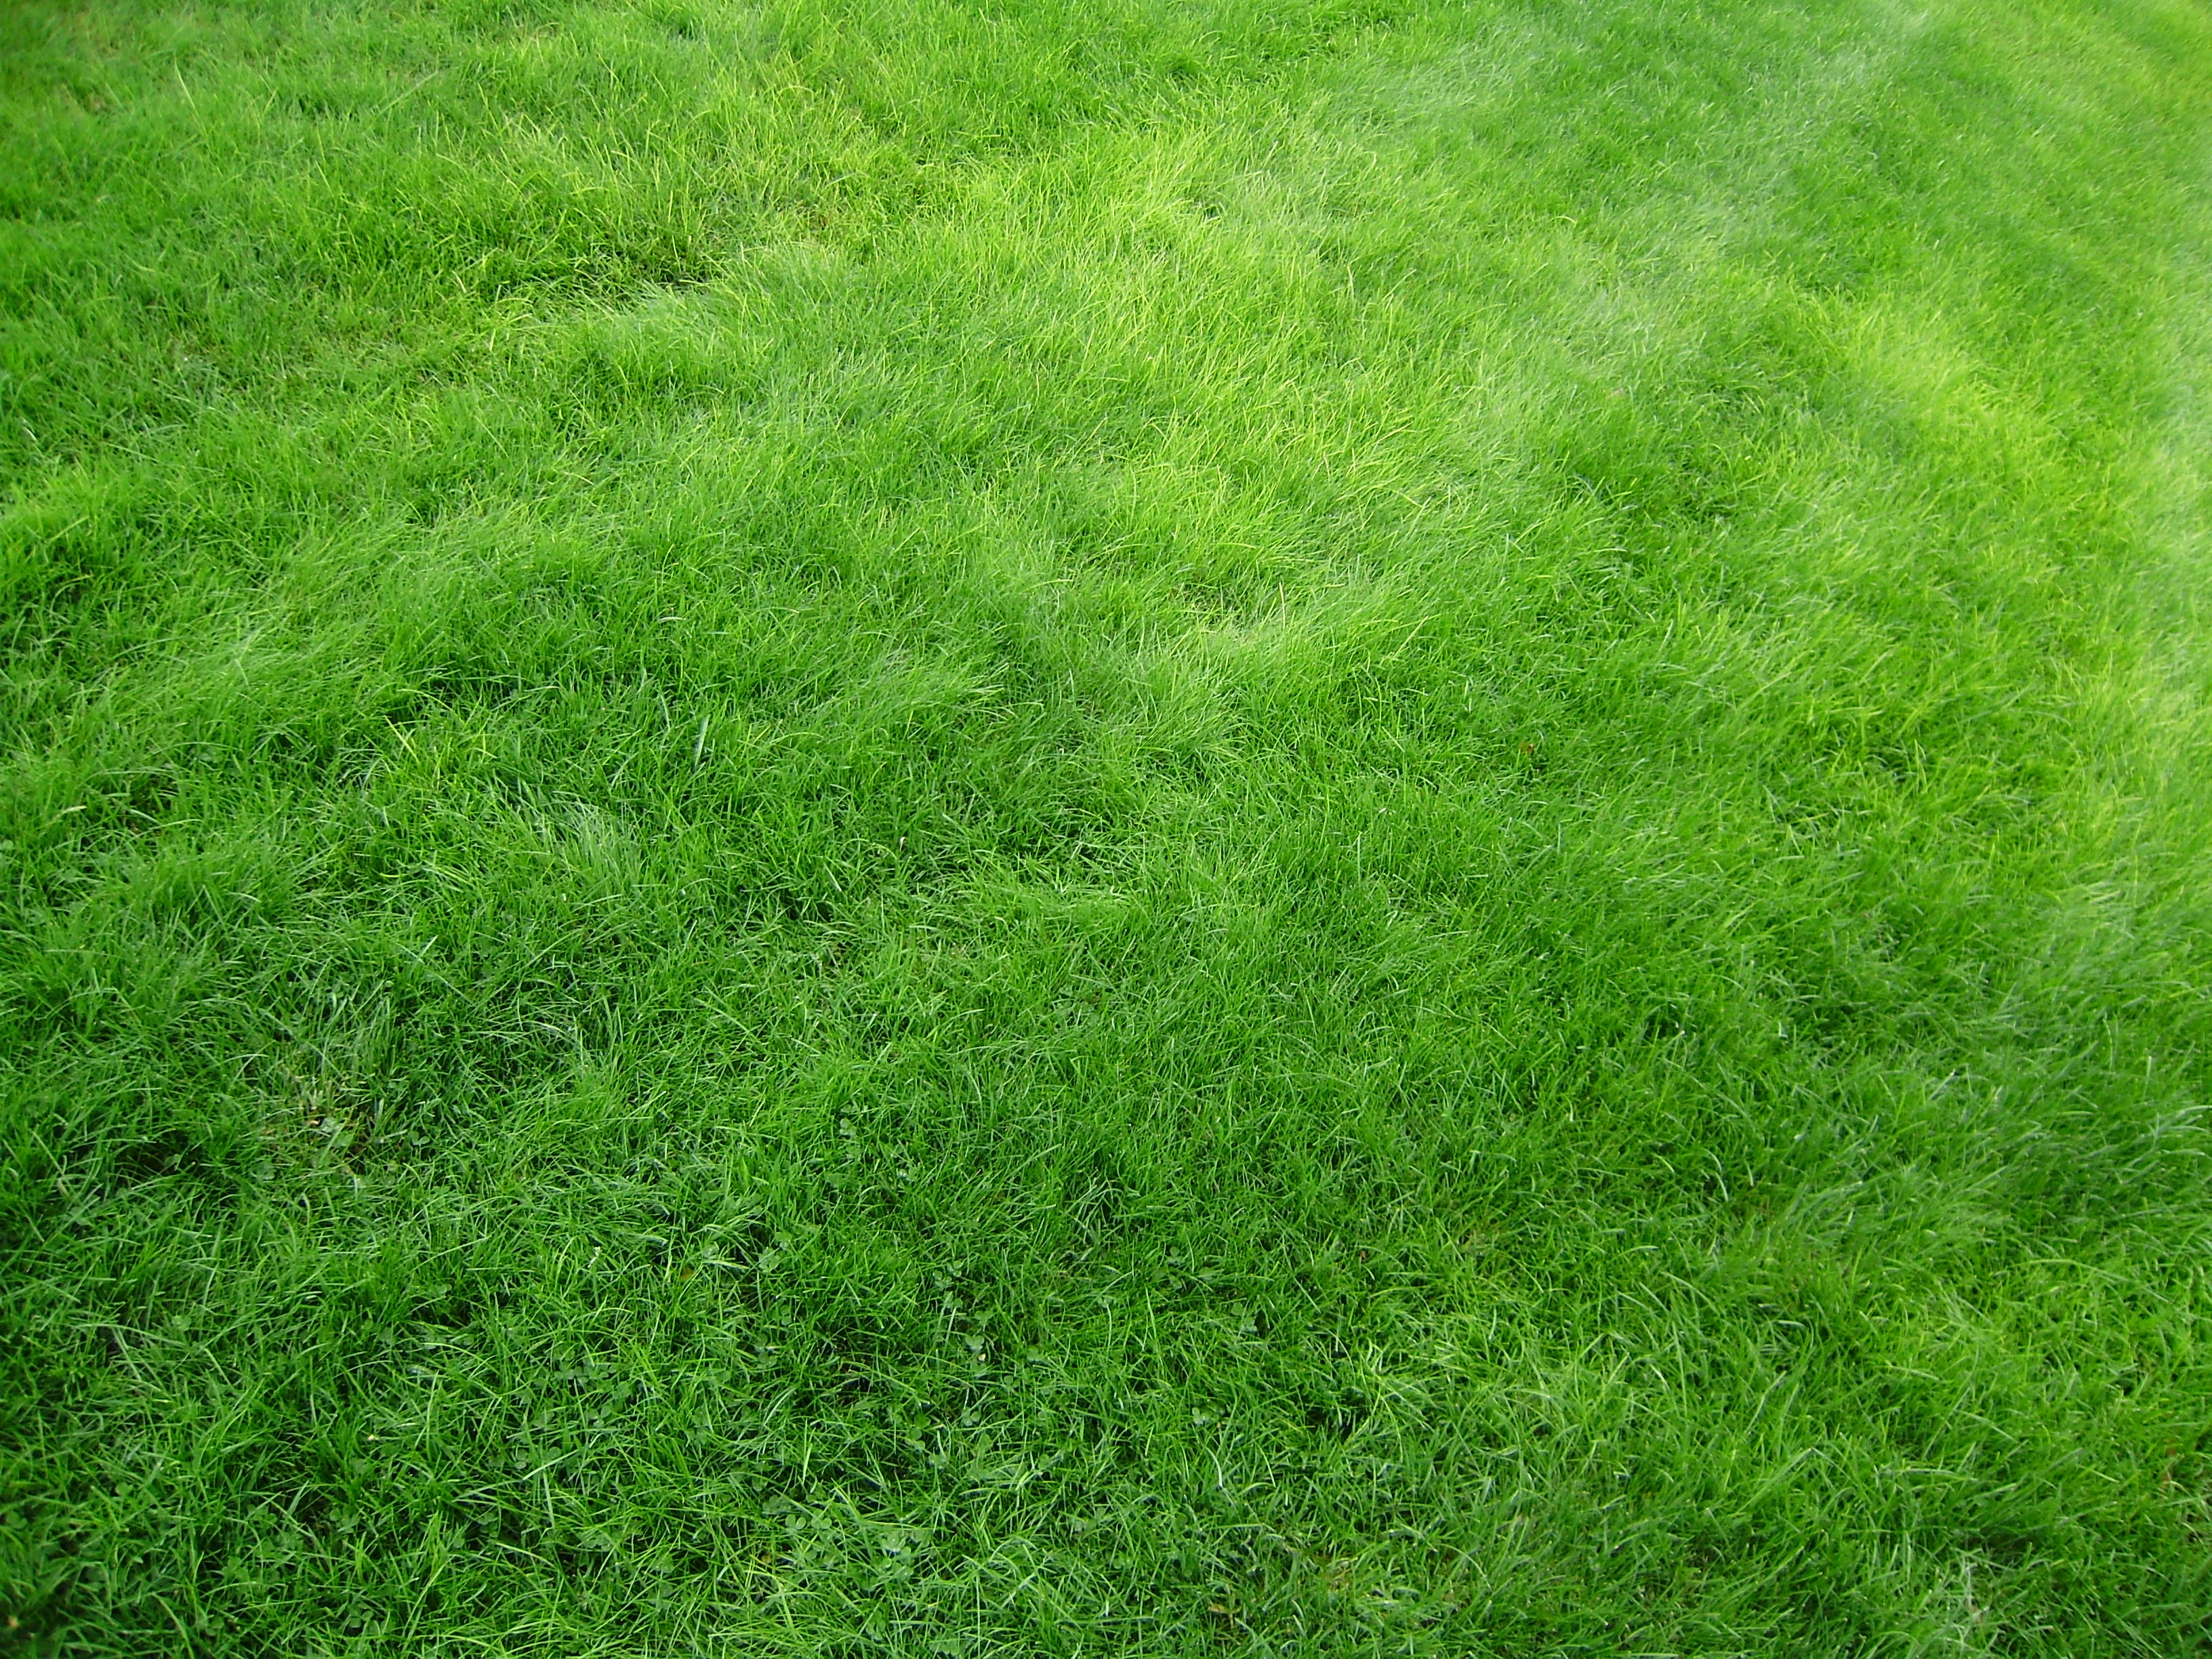 android grass, lawn, green, texture, field, textures